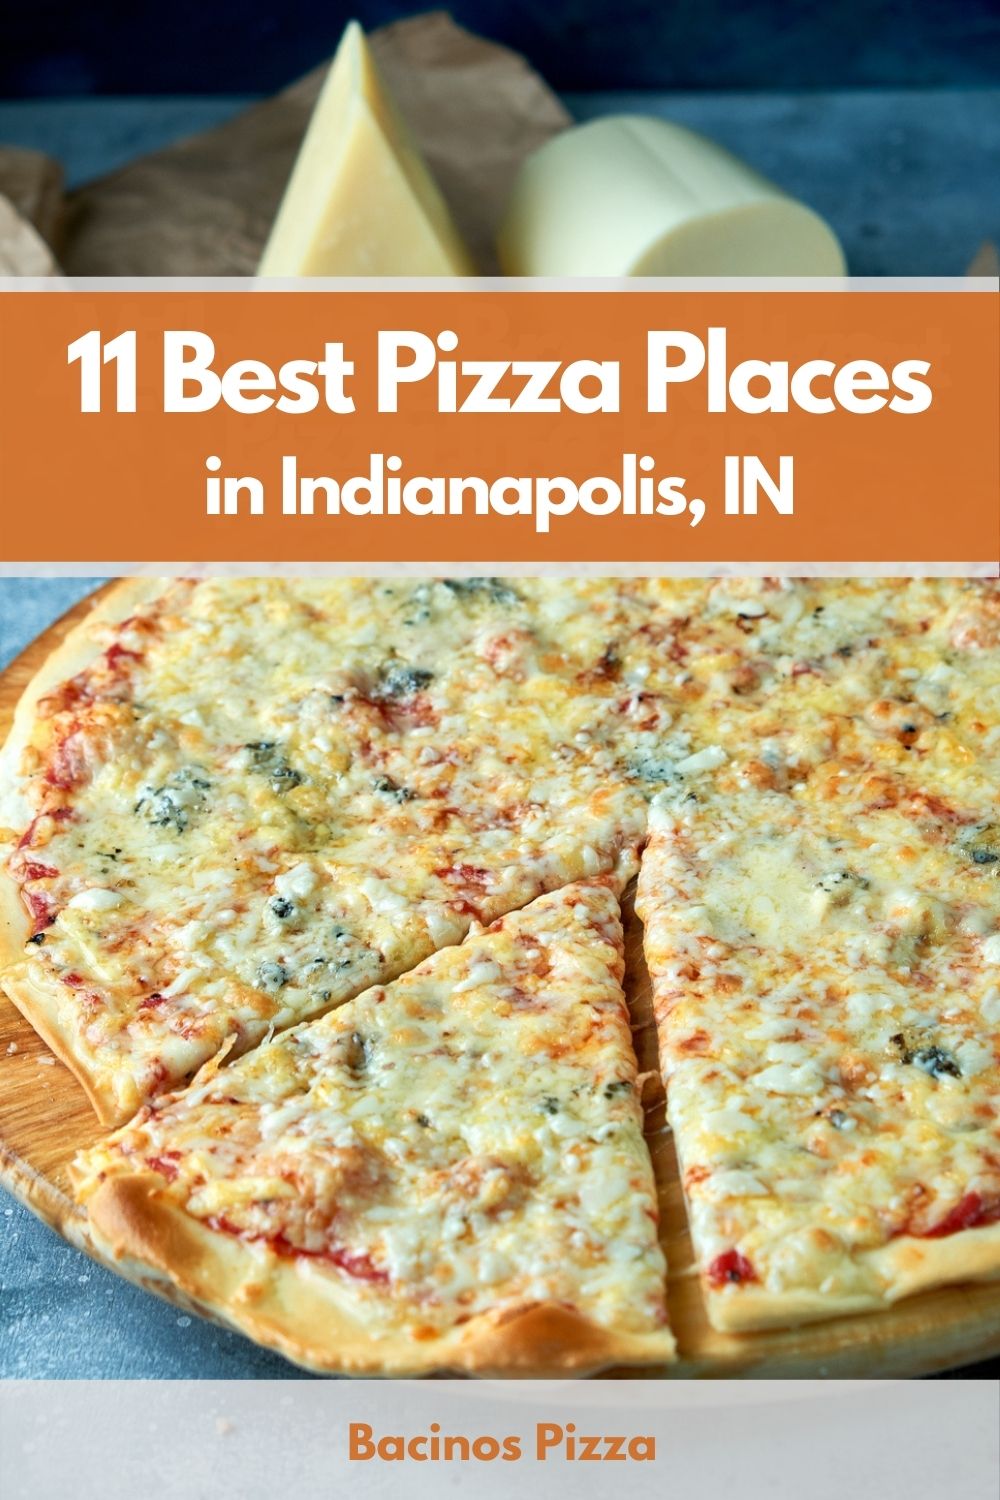 11 Best Pizza Places in Indianapolis, IN pin